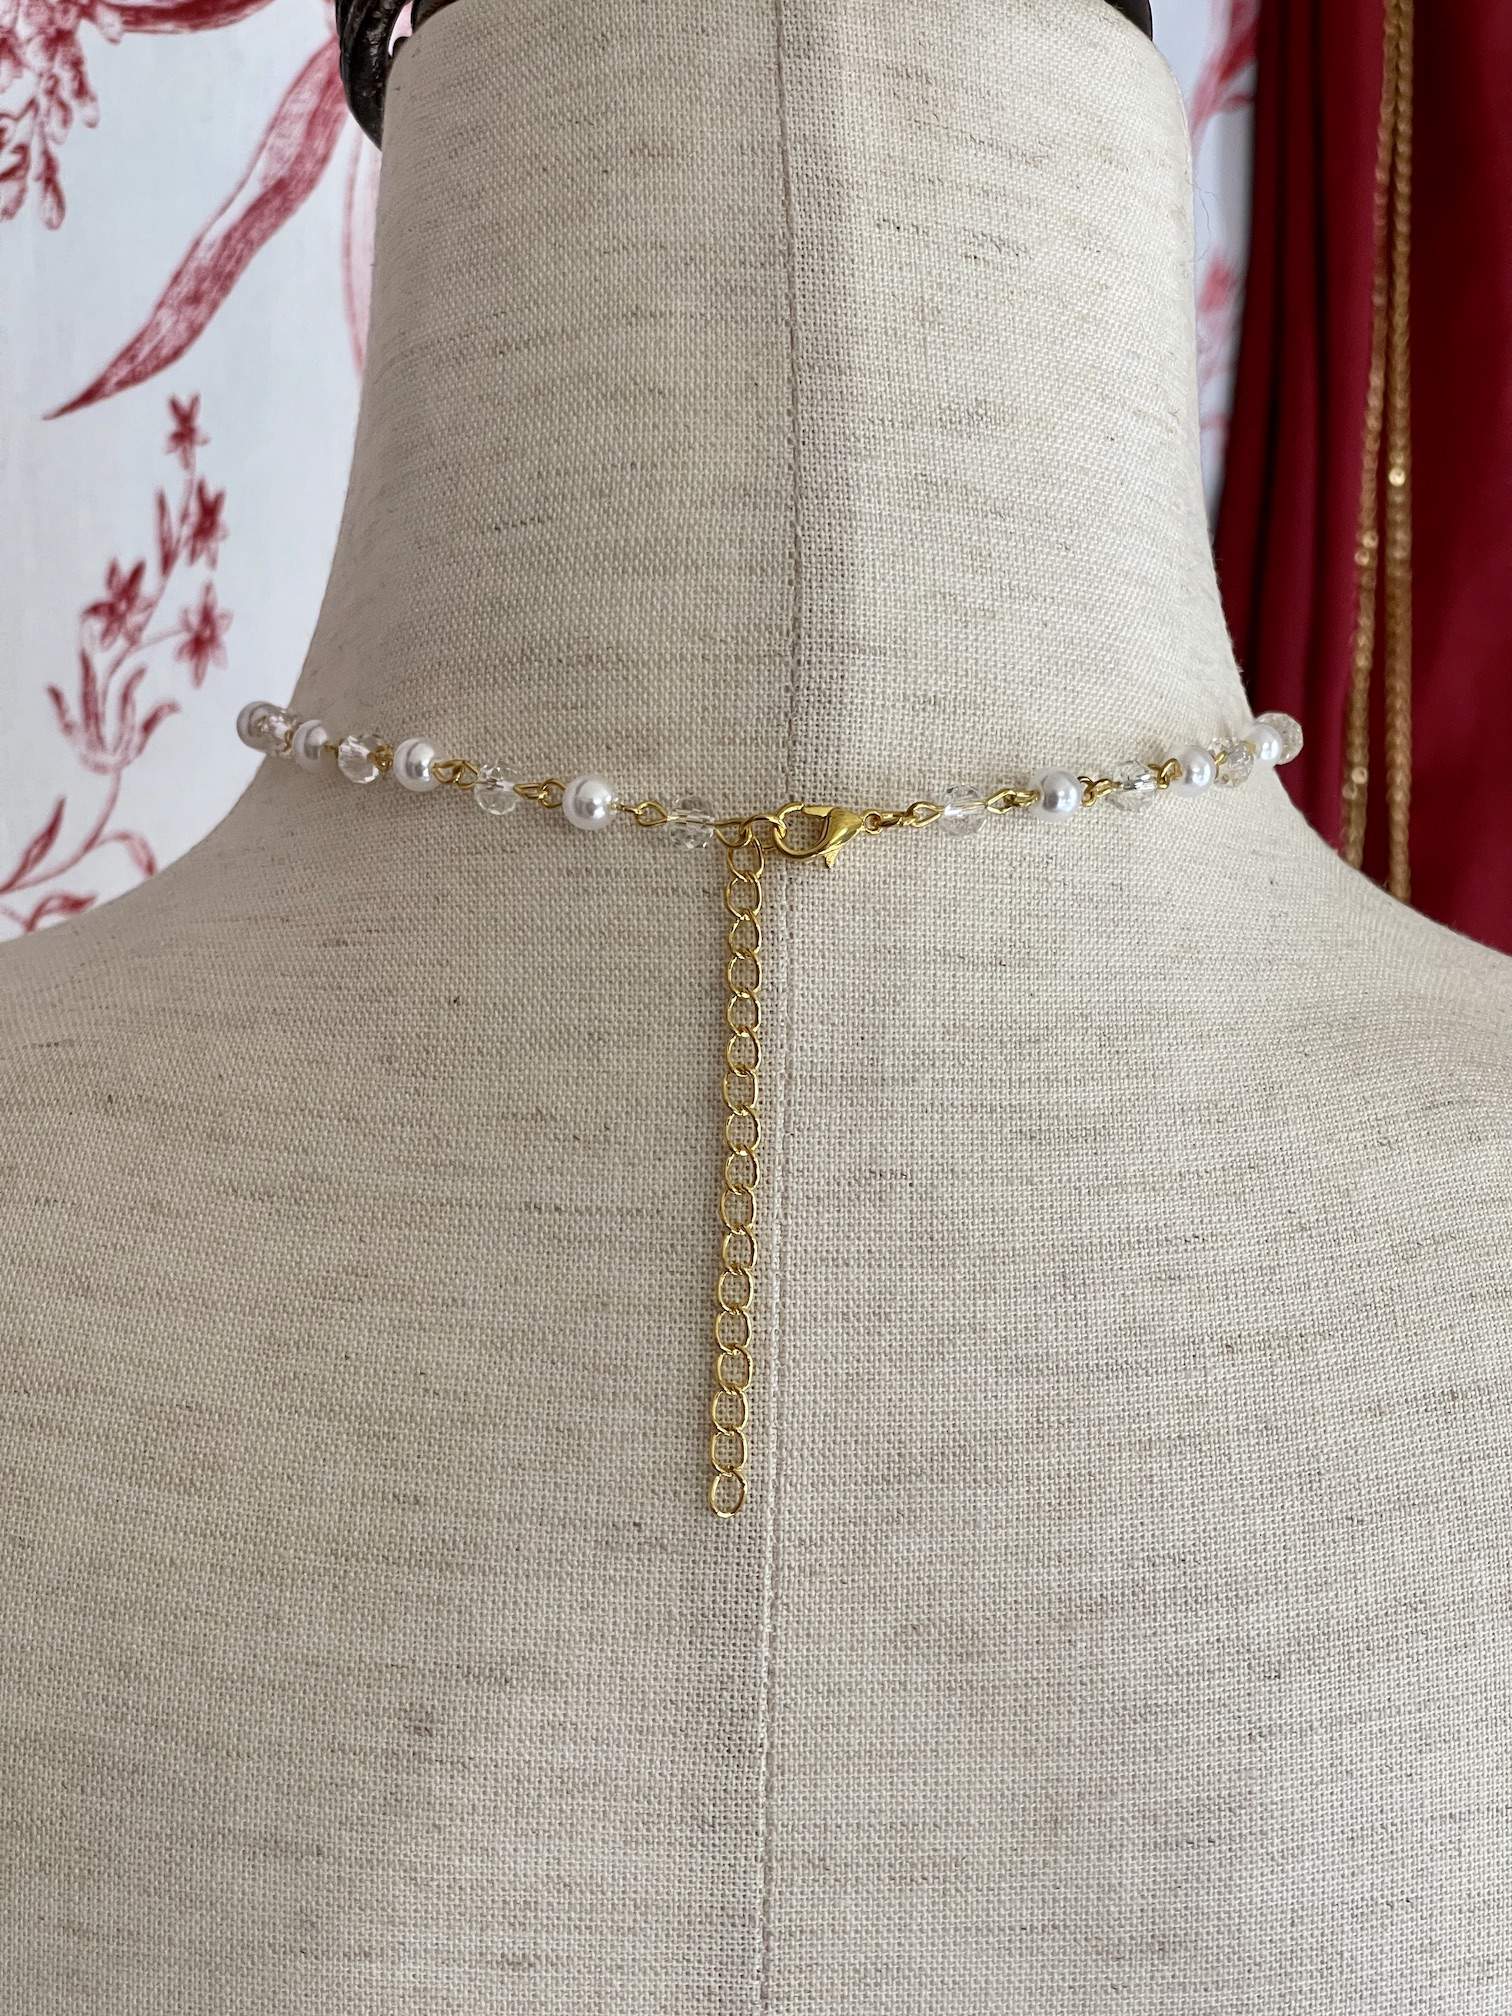 A Historically Inspired Romantic Era Heart Shaped Locket Necklace in Gold with pearl chain. Regency, Rococo, Victorian, Edwardian era jewelry.